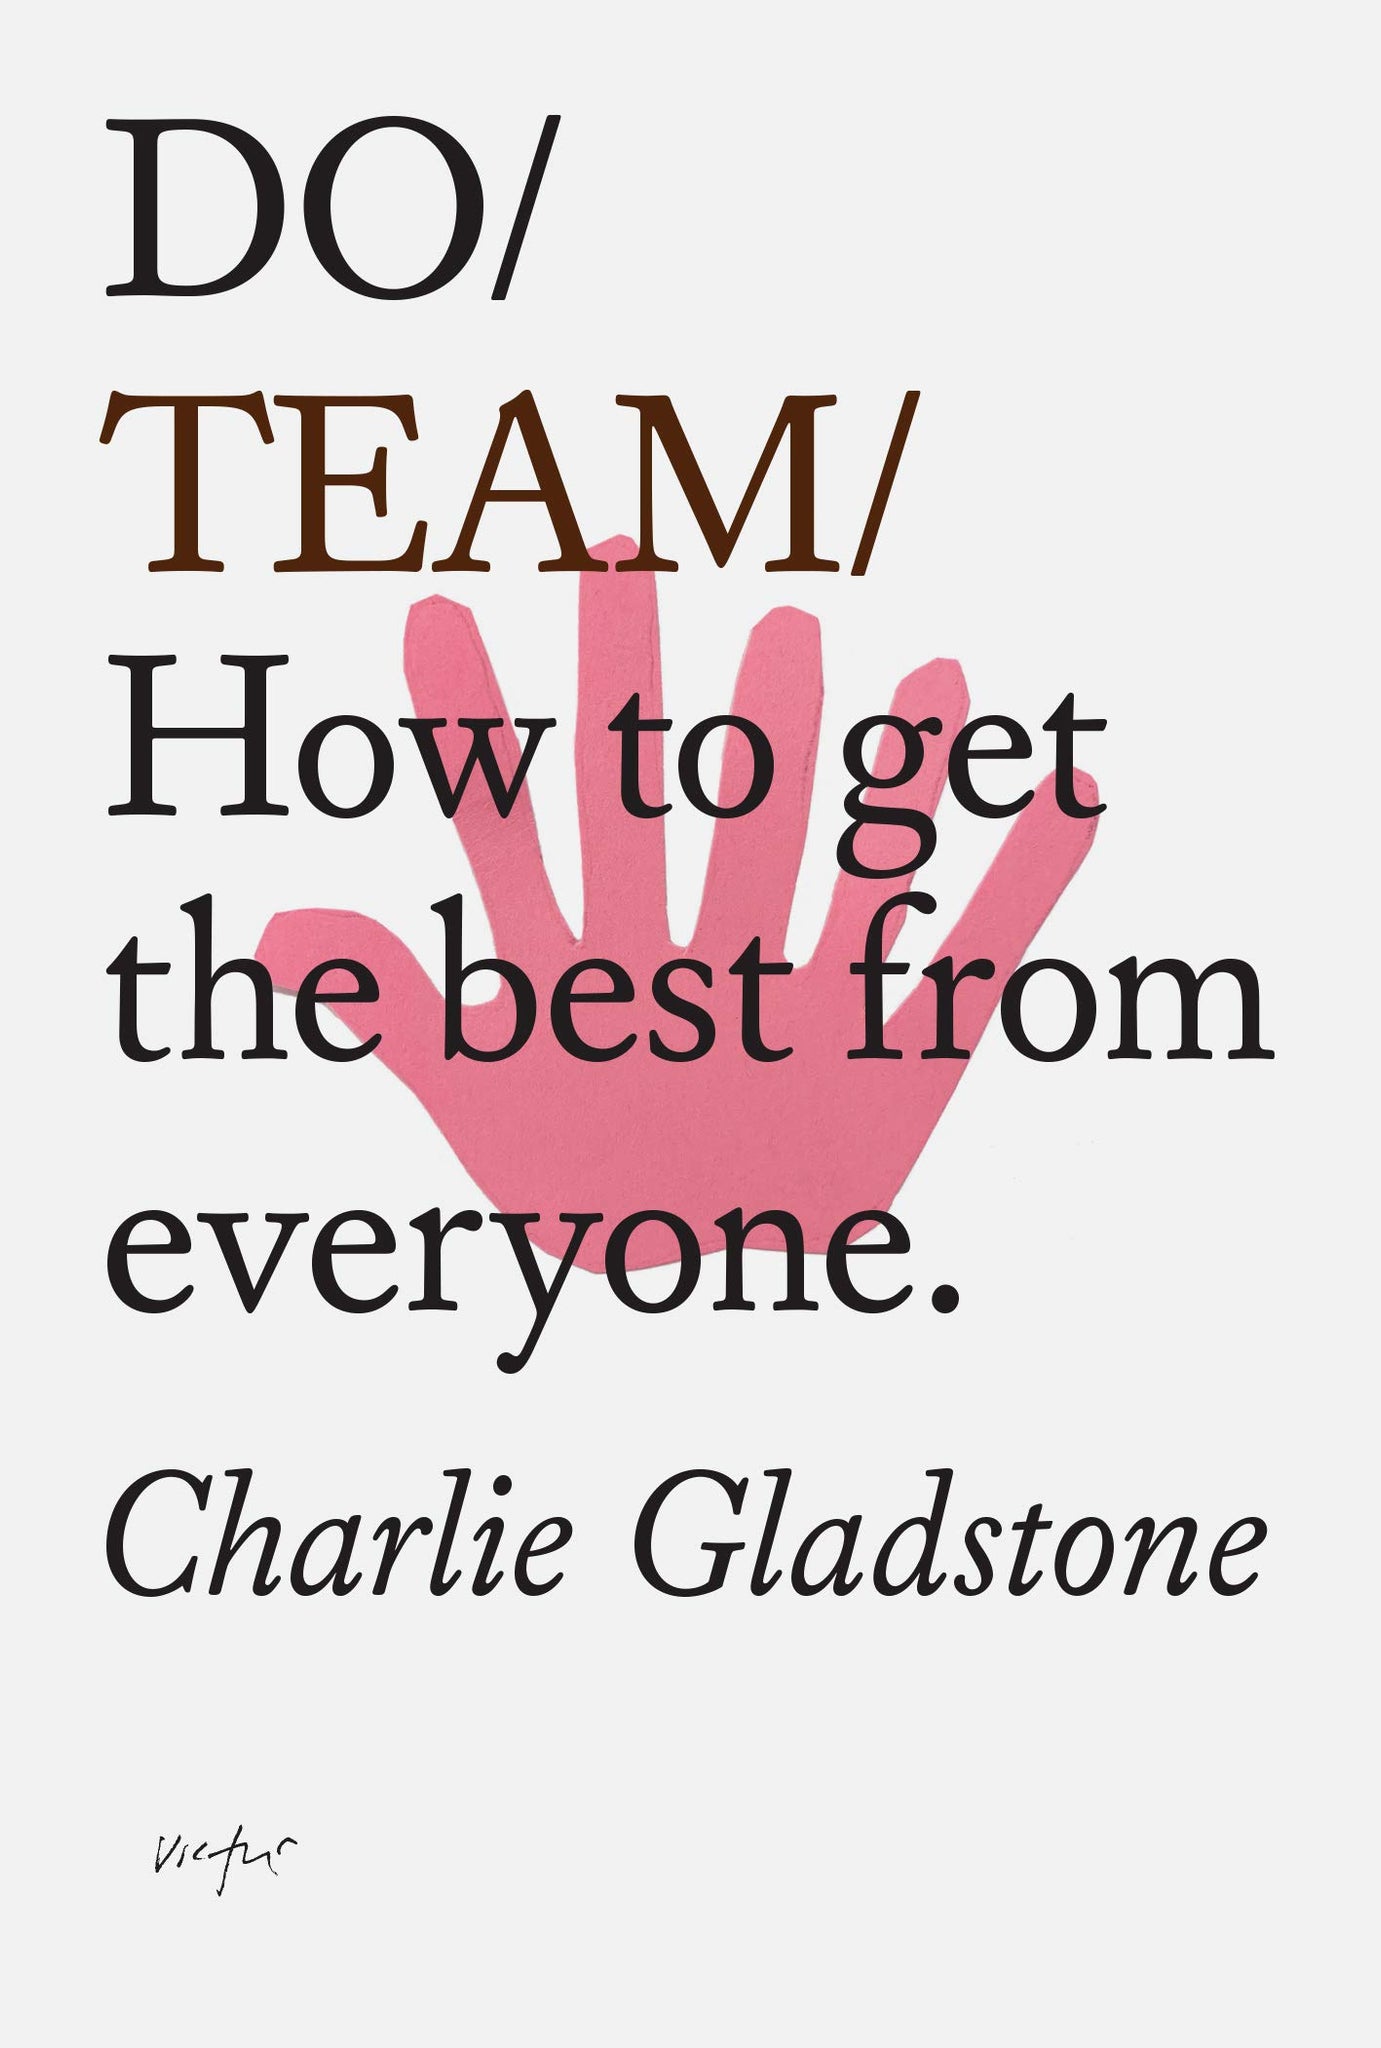 Do Team: How to Get the Best From Everyone